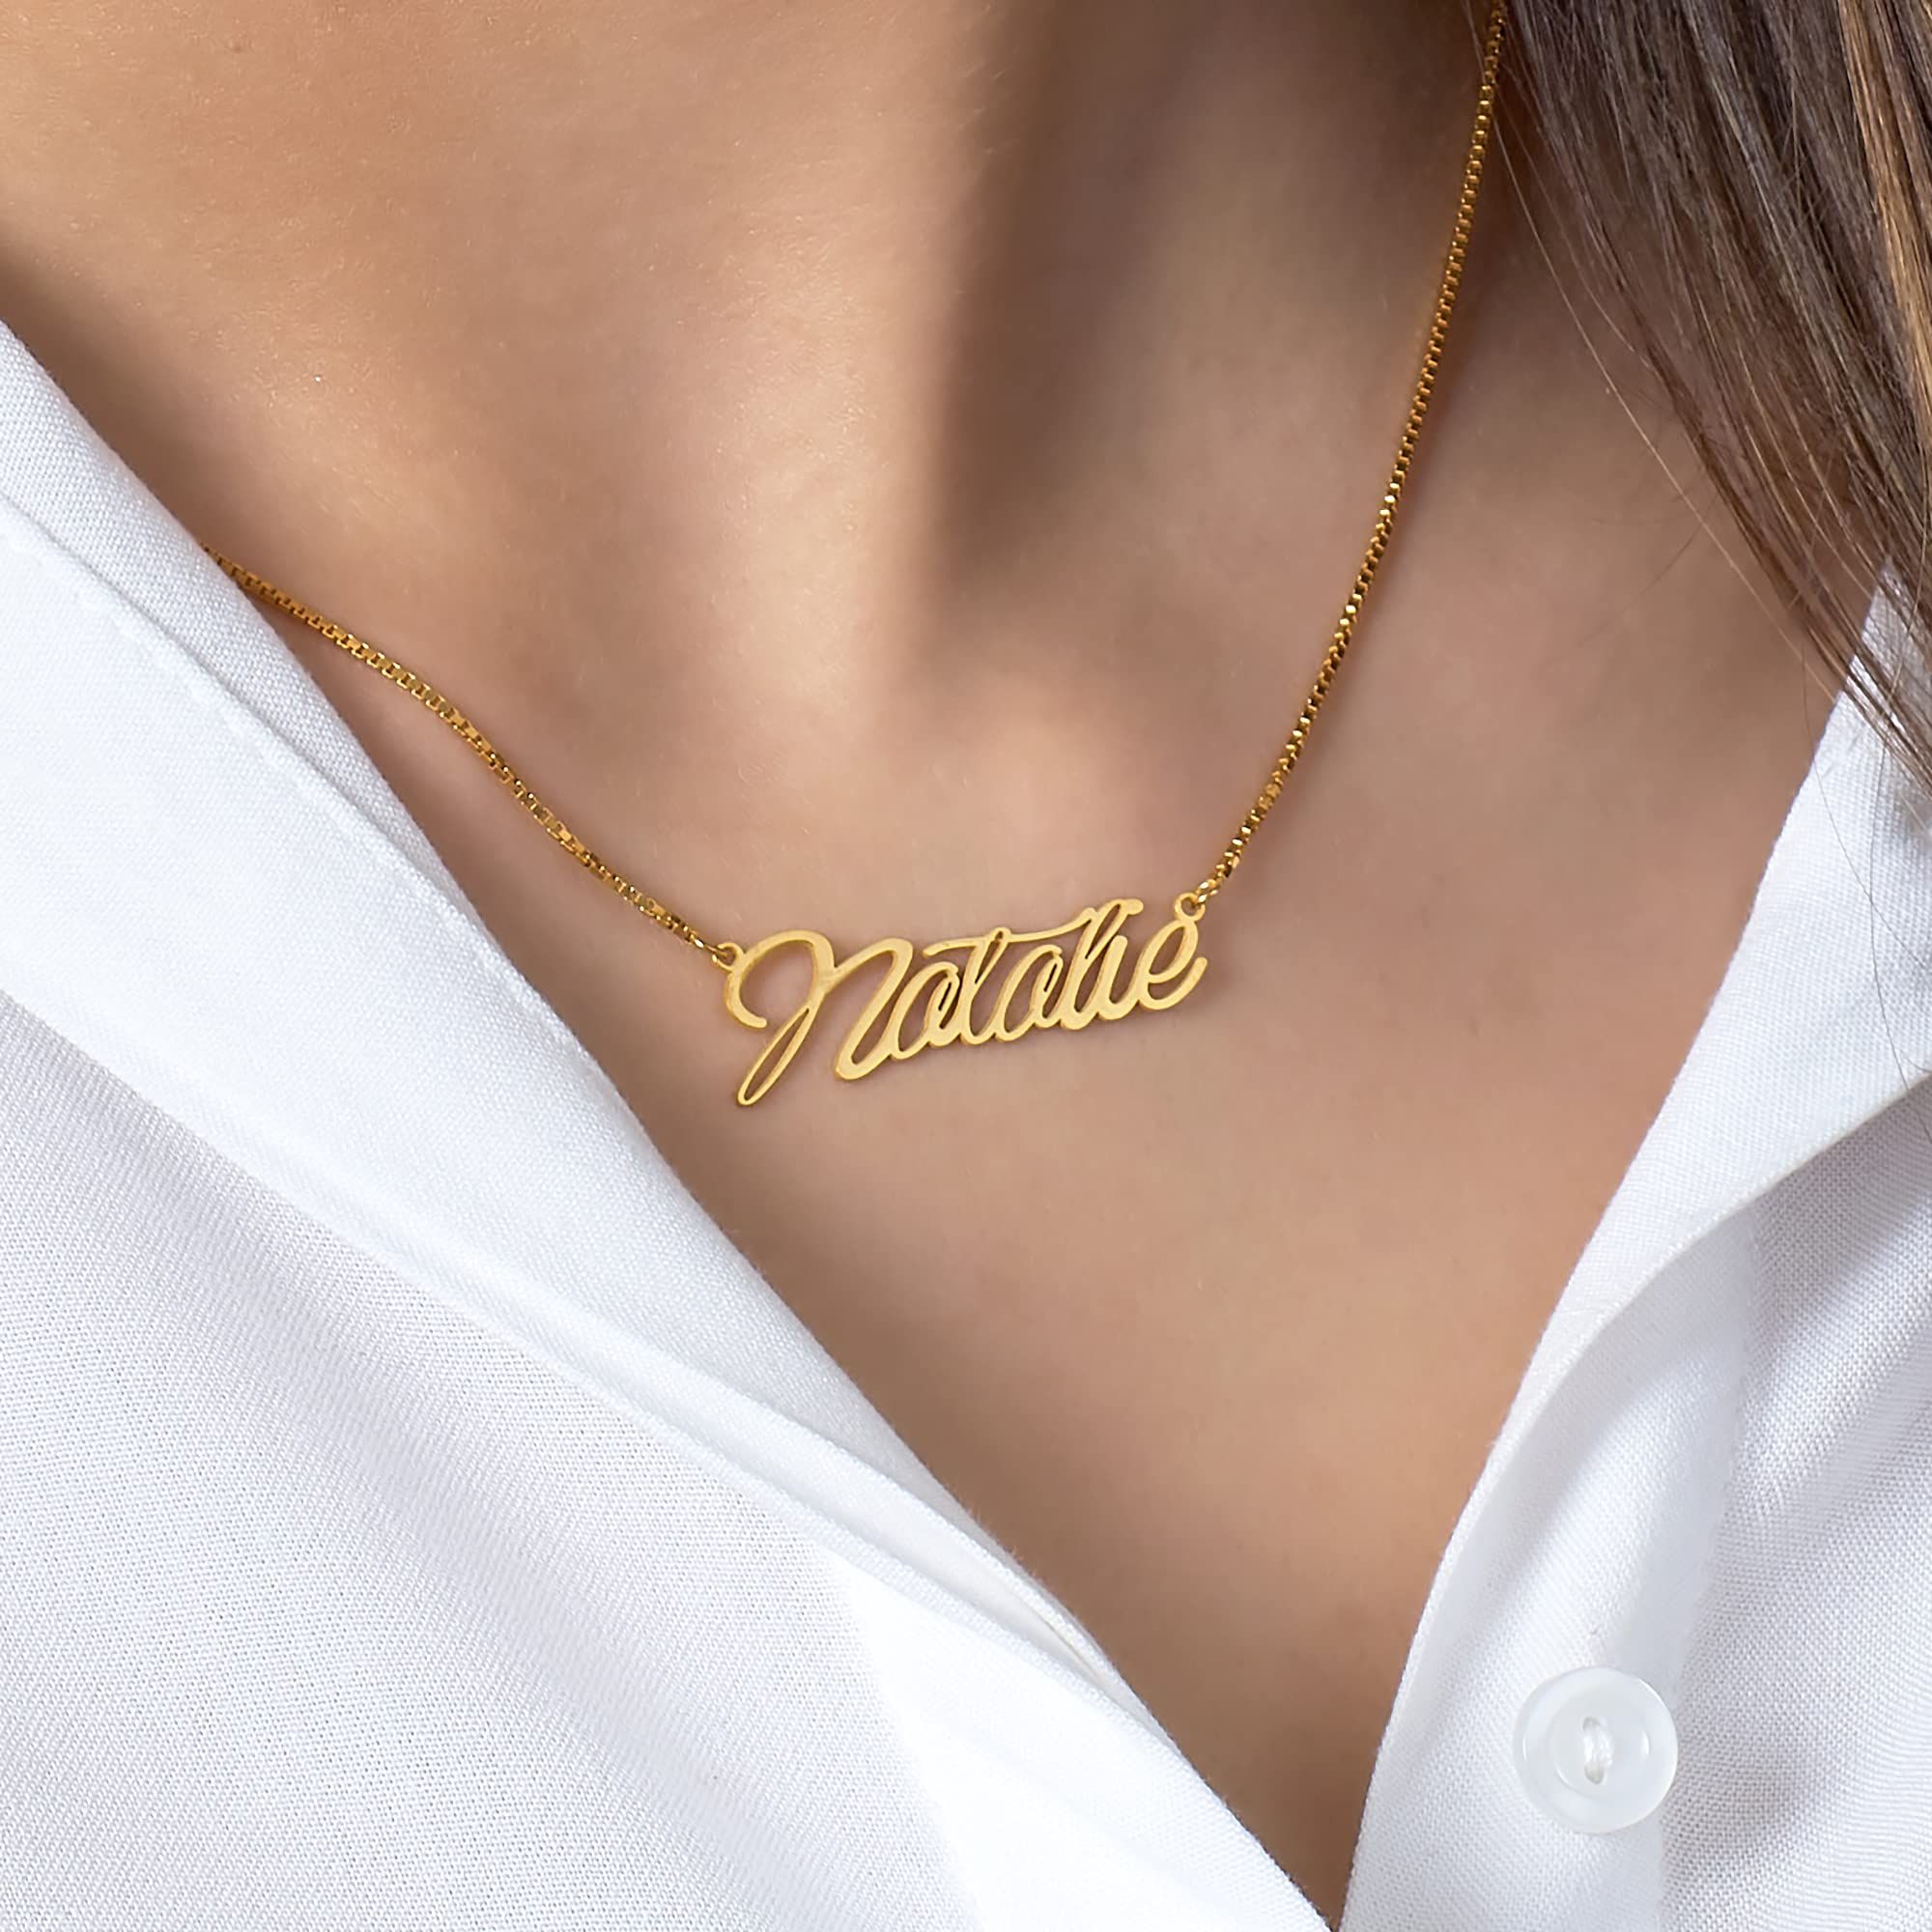 Customised name necklace